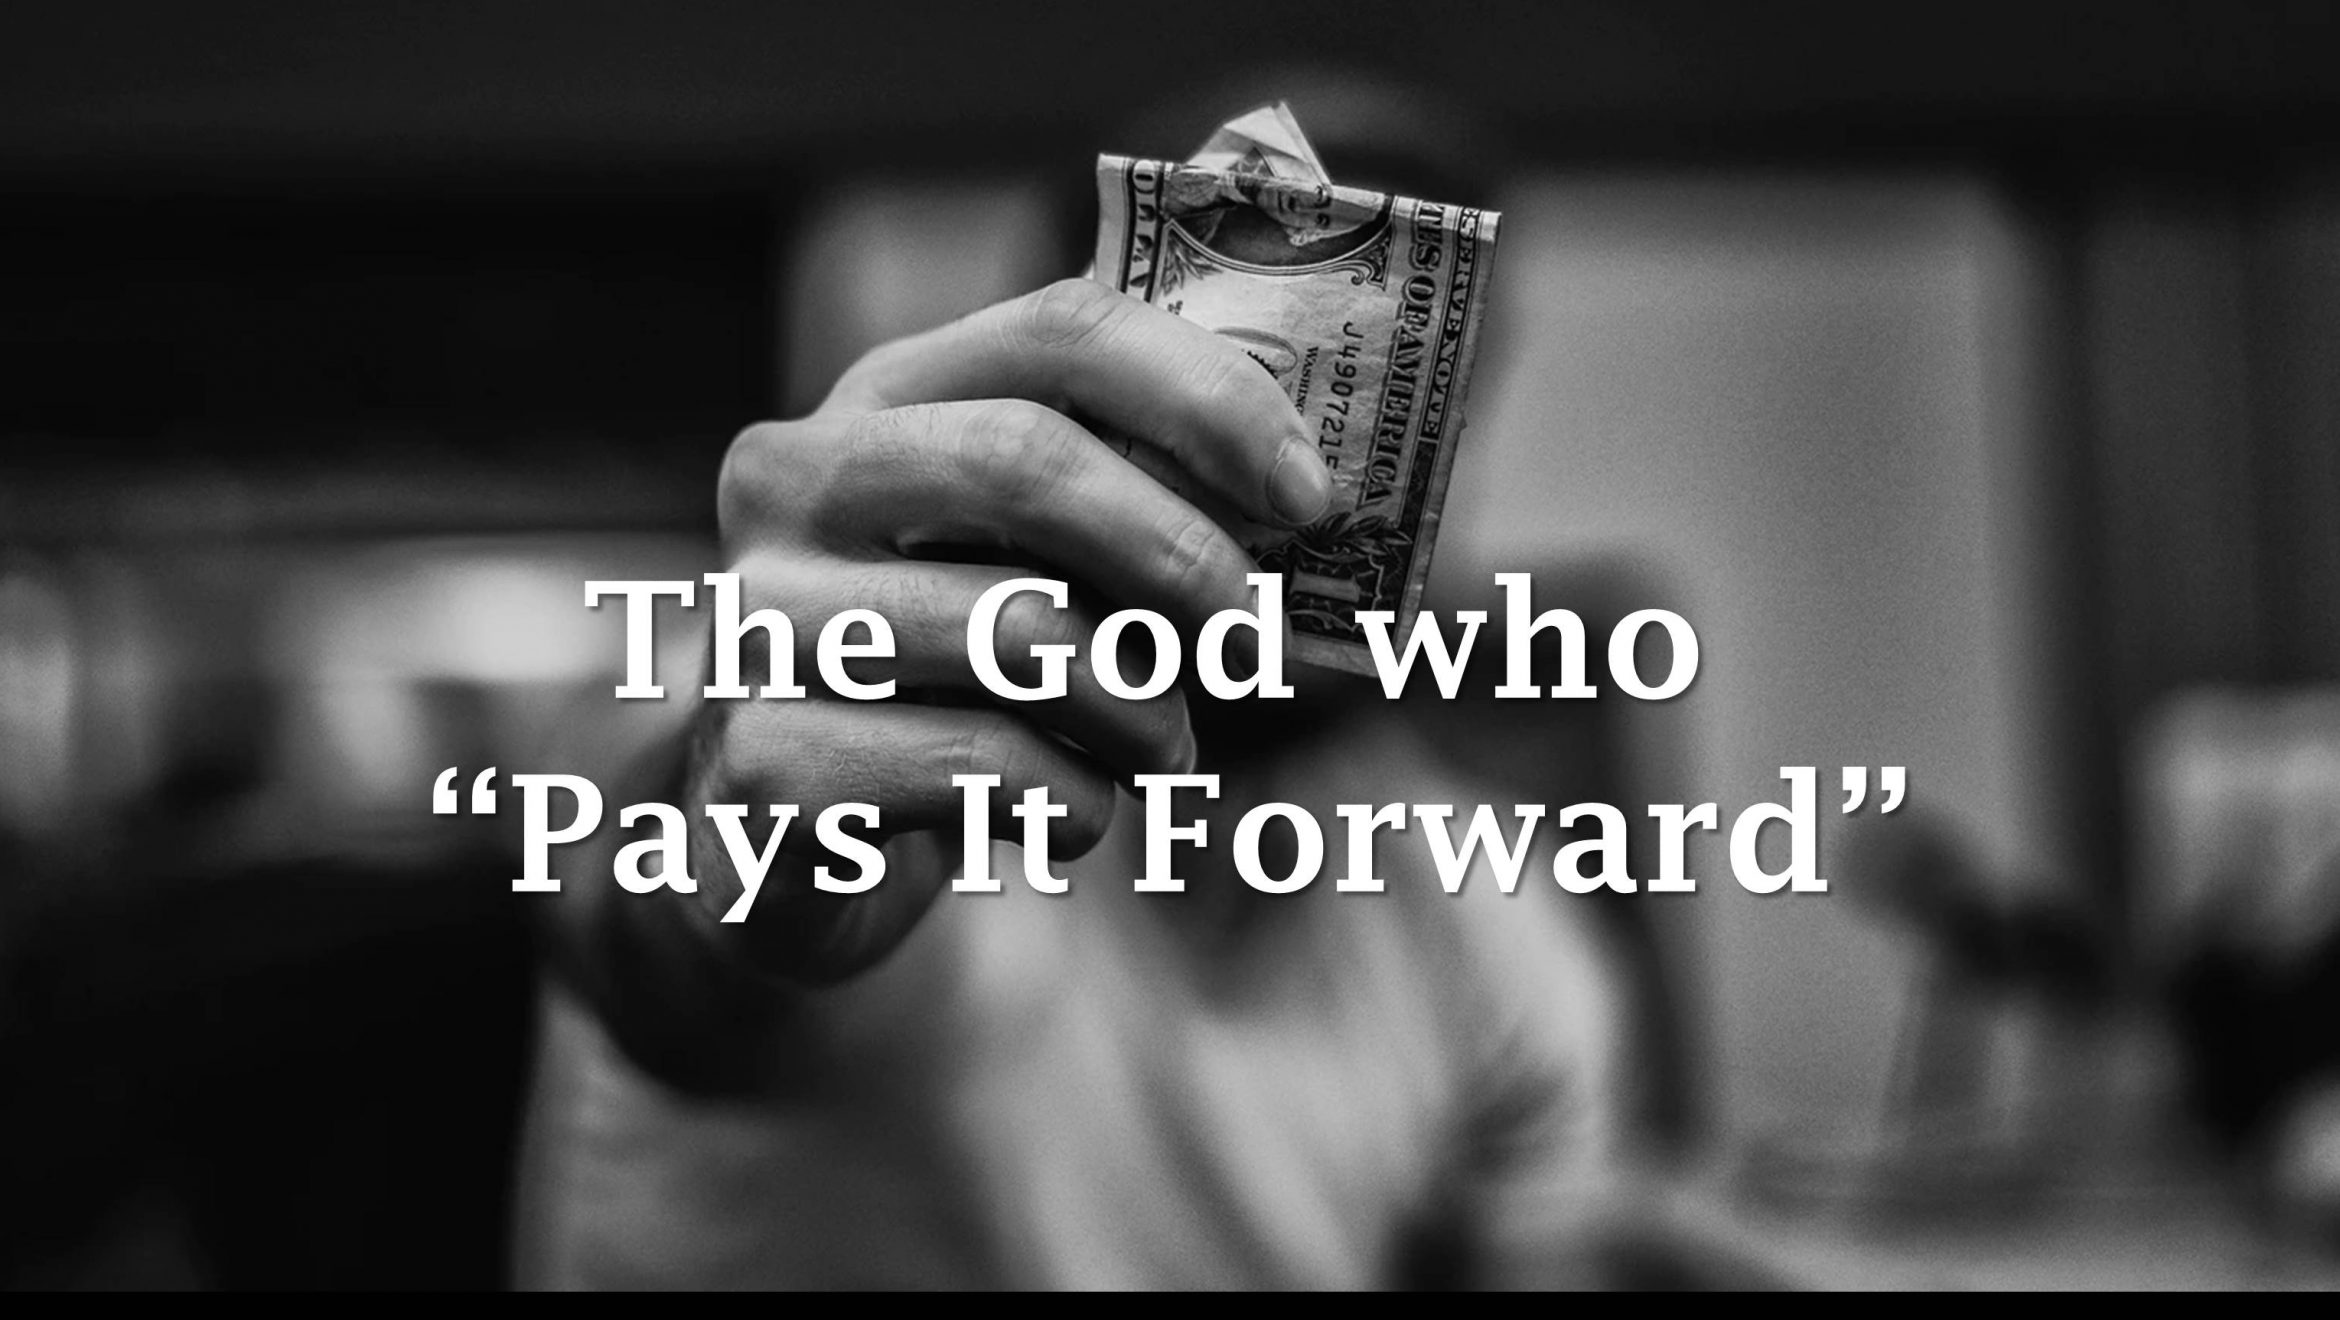 The God who “Pays It Forward”